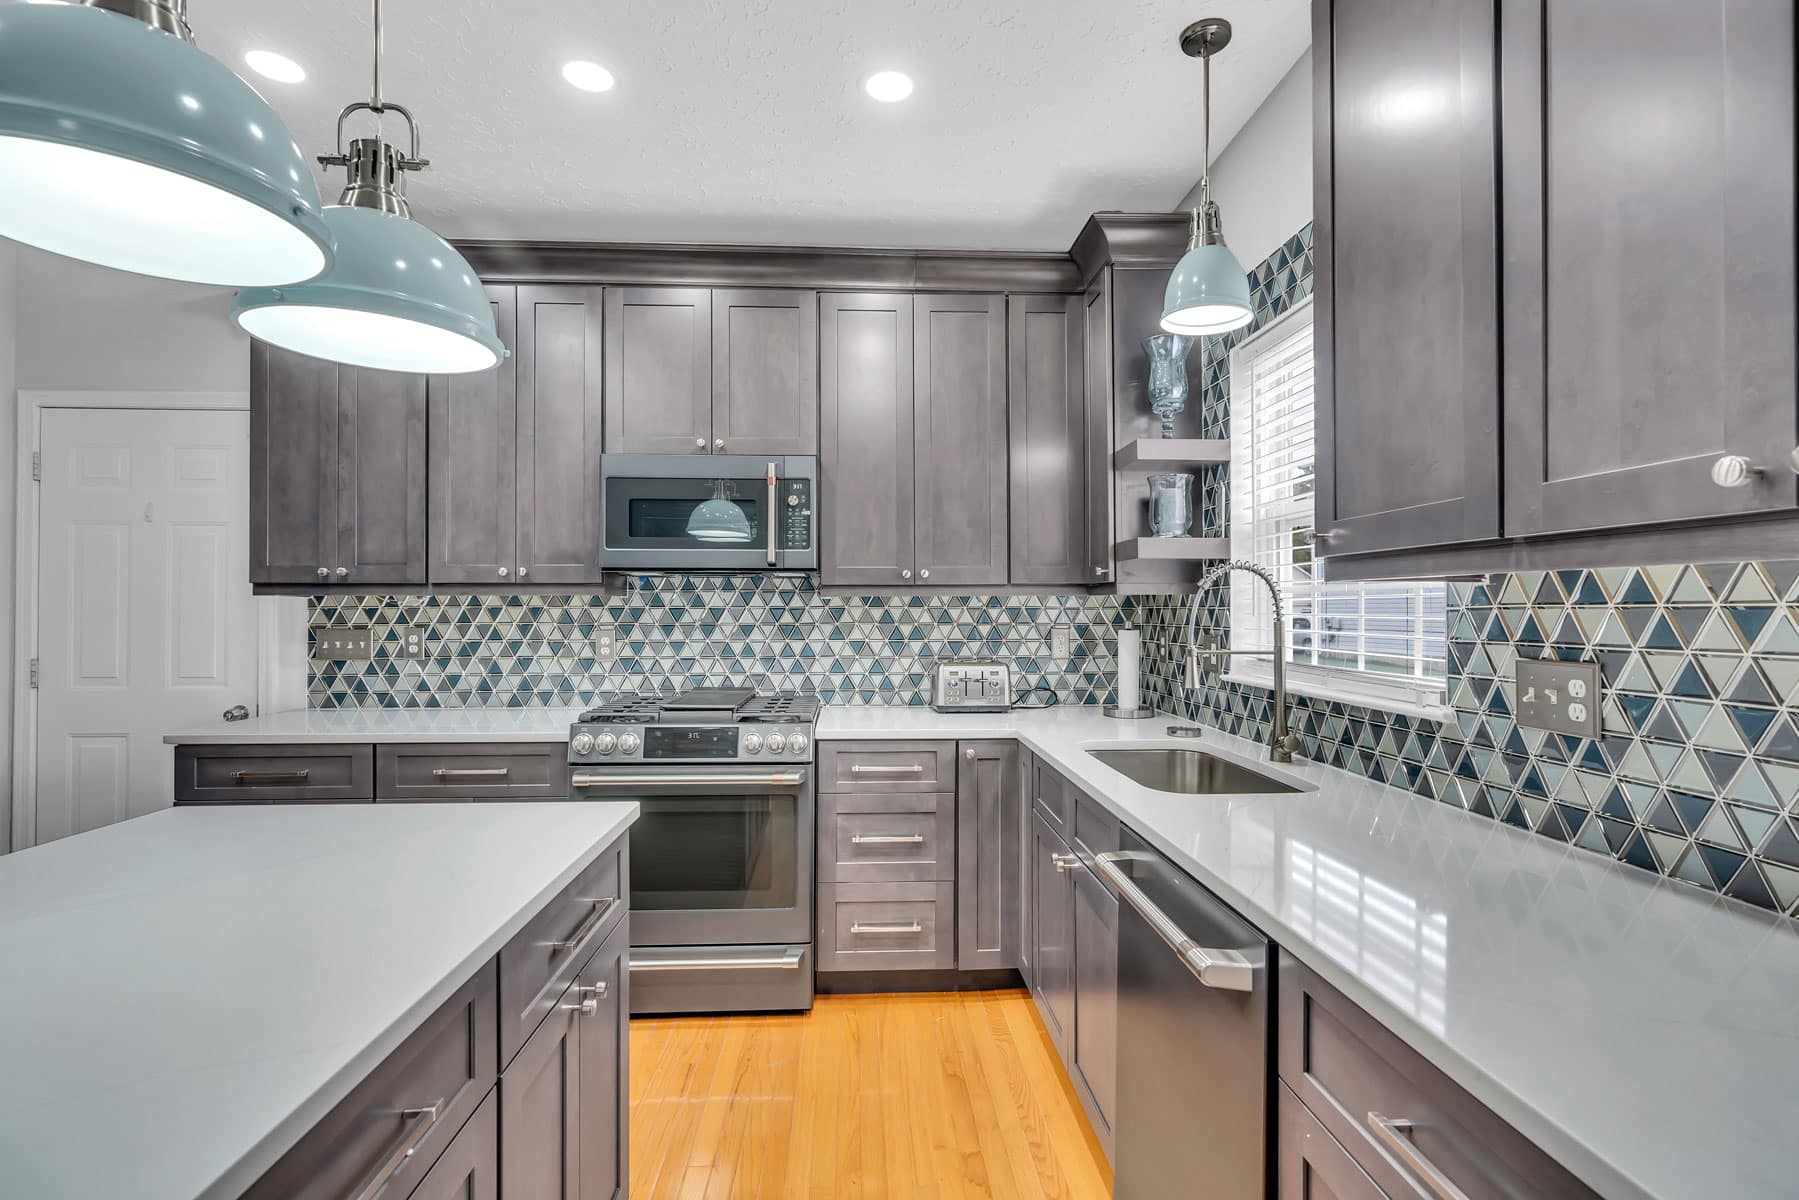 Spacious kitchen project in waldorf md with gray shaker cabinets, white countertop, patterned backsplash, and wood flooring